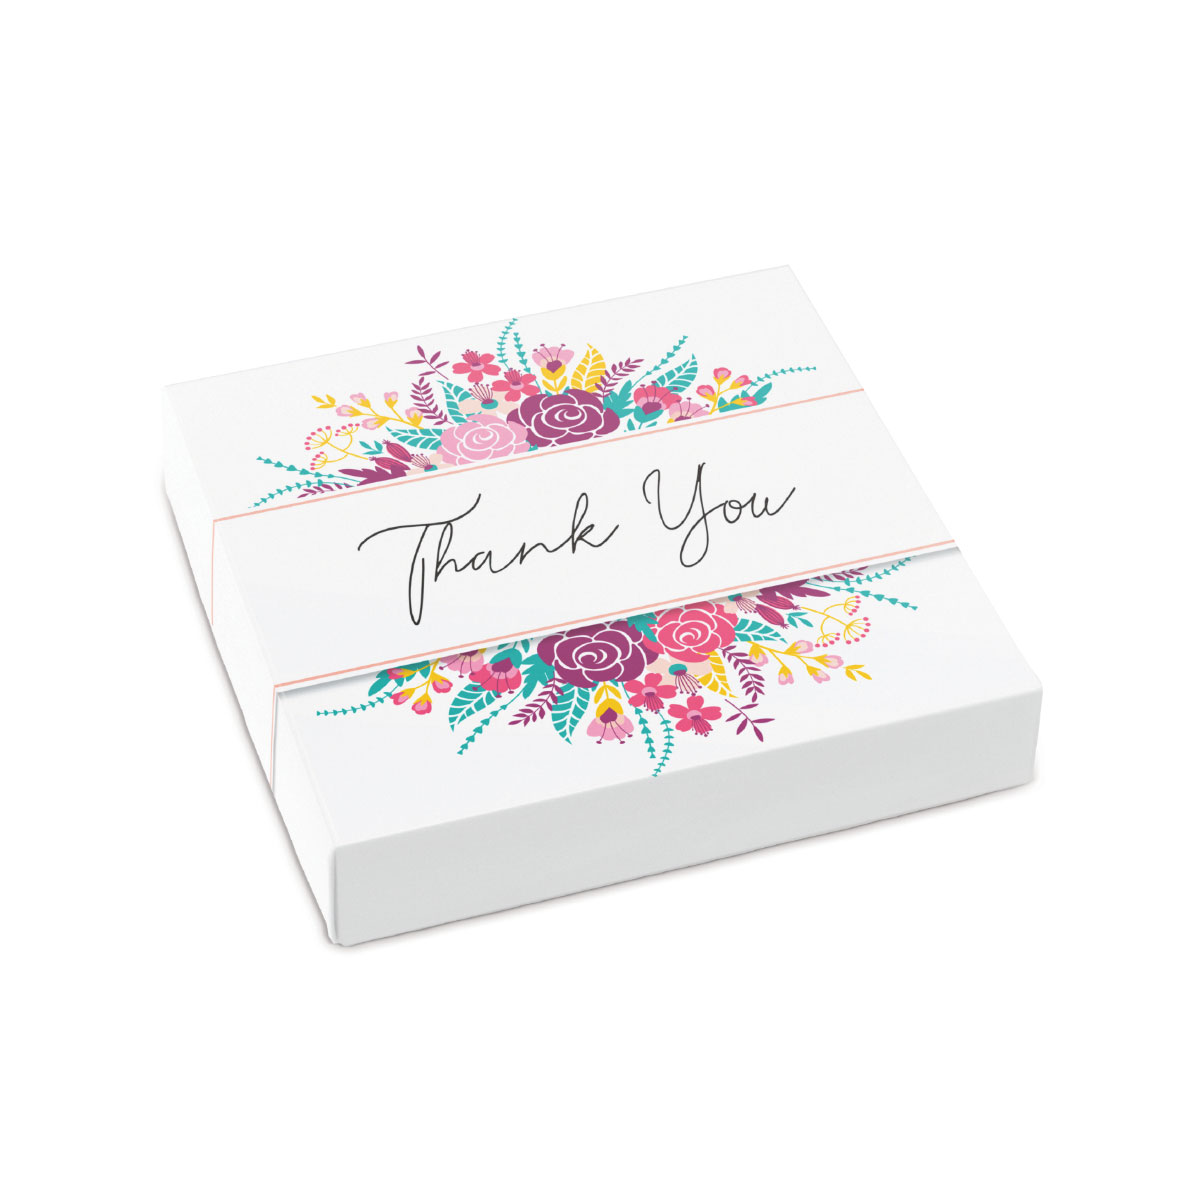 Floral Thank You Themed Box Cover for 16 Piece Holiday Assortment